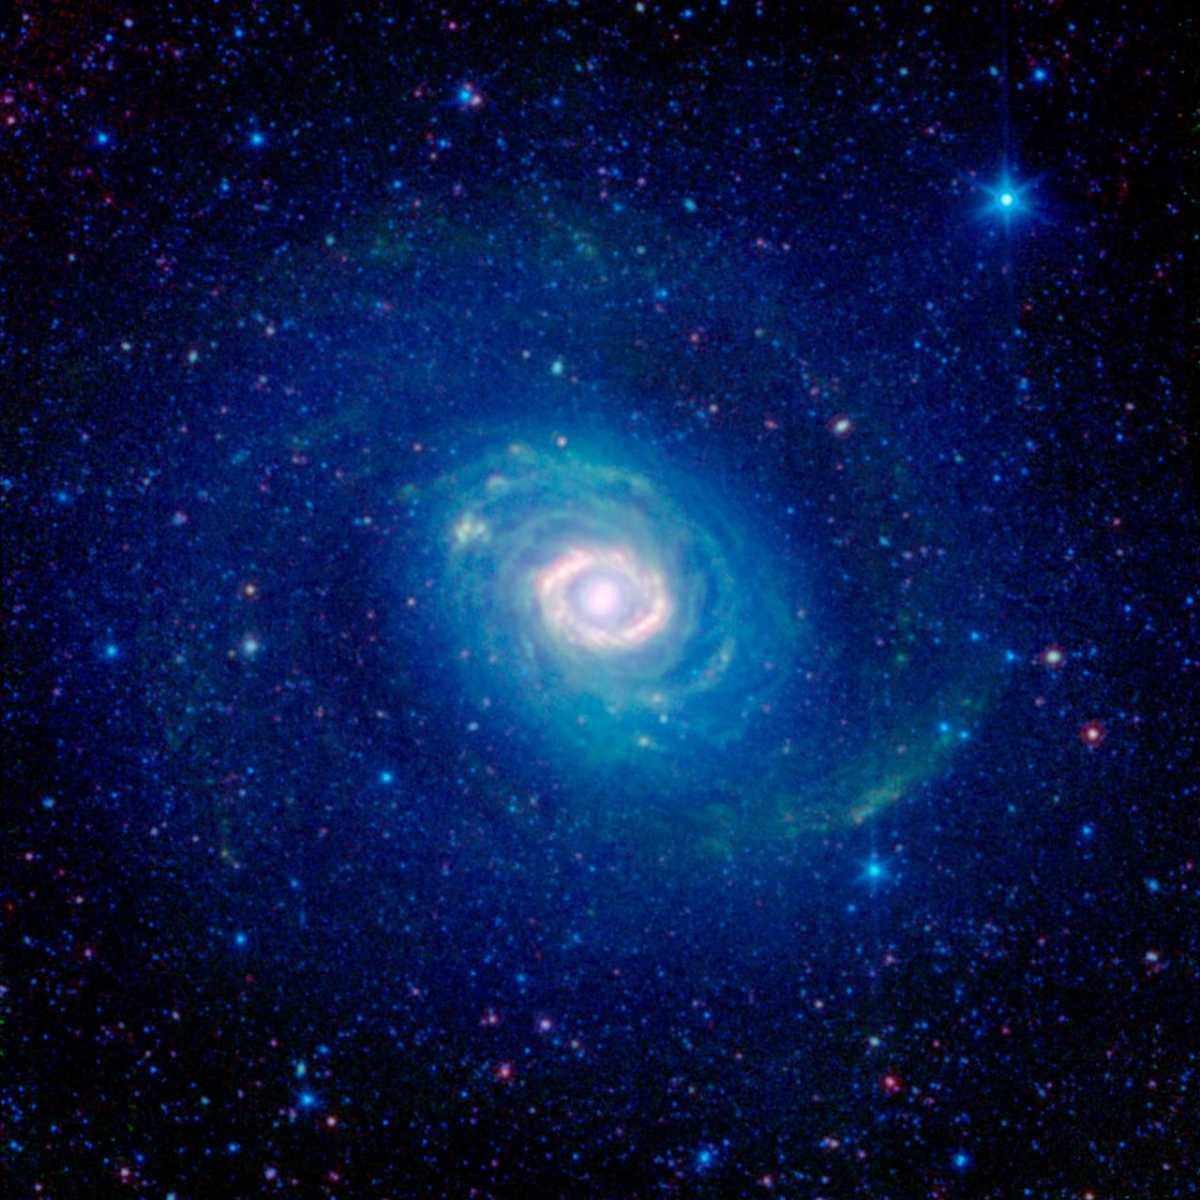 Galaxy picture: 23 of NASA's best image of space